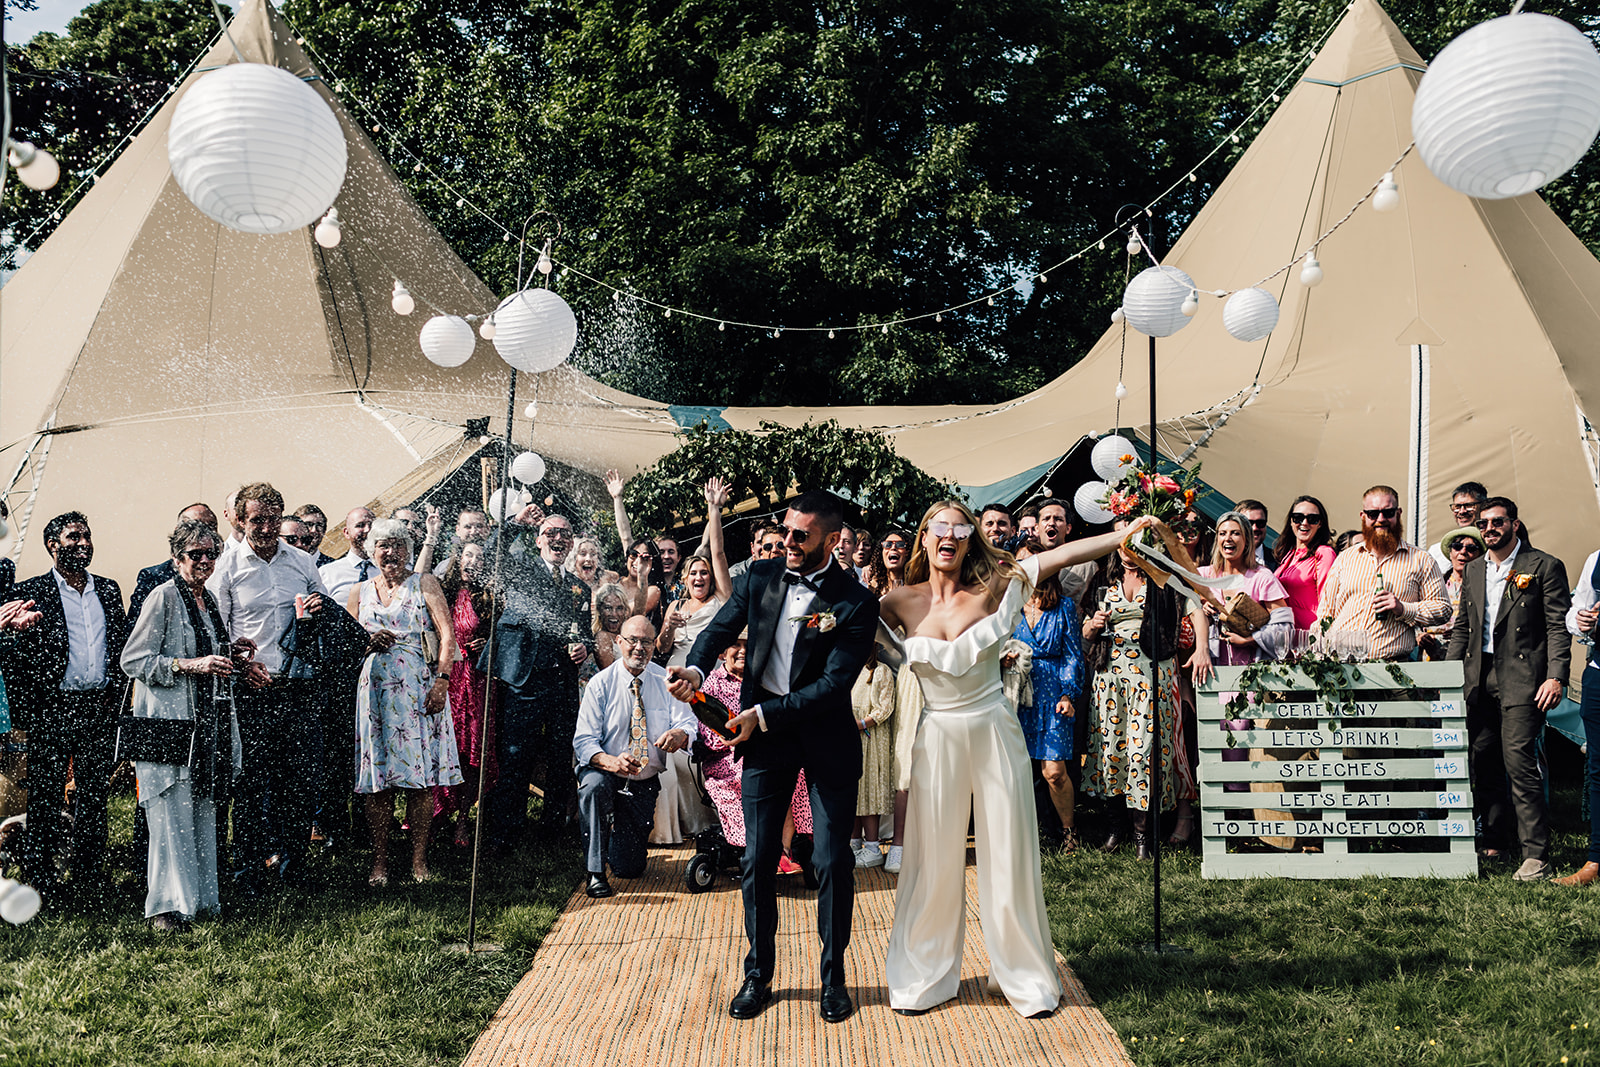 Bride and Groom popping champagne in front of wedding guests at tipi festival styled wedding.